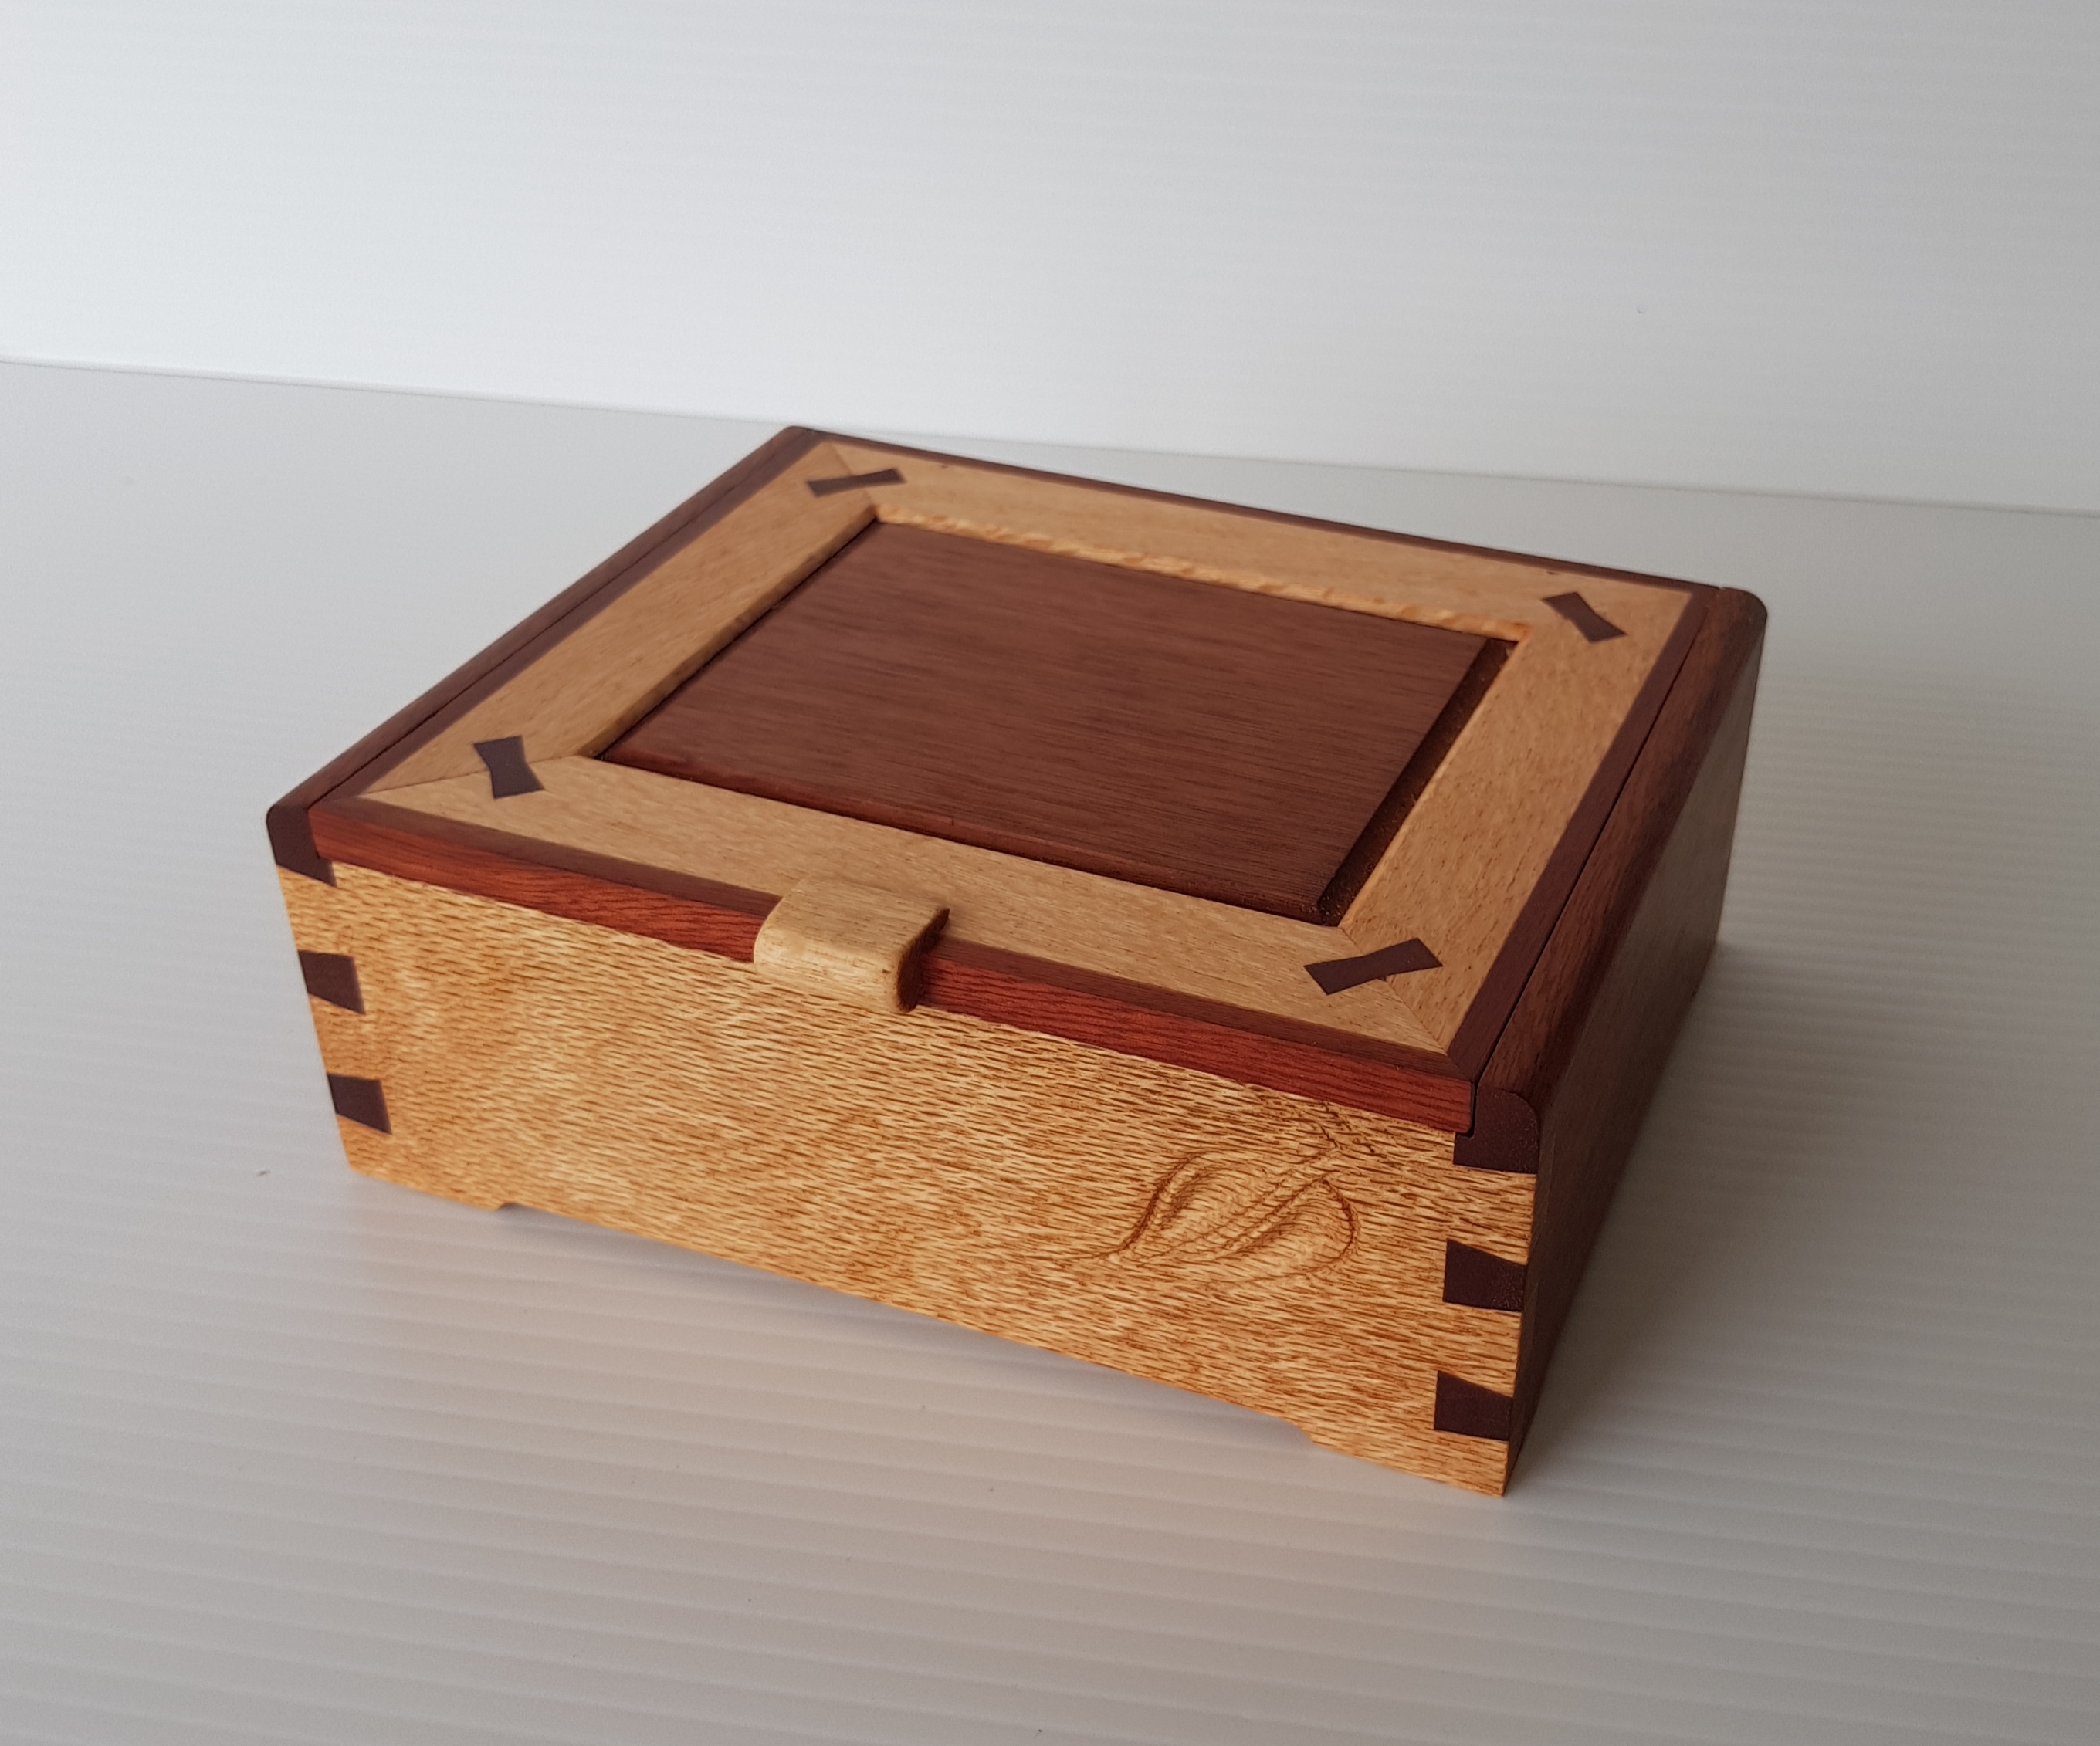 Trinket box no 1 is made individually from quality Australian timbers.